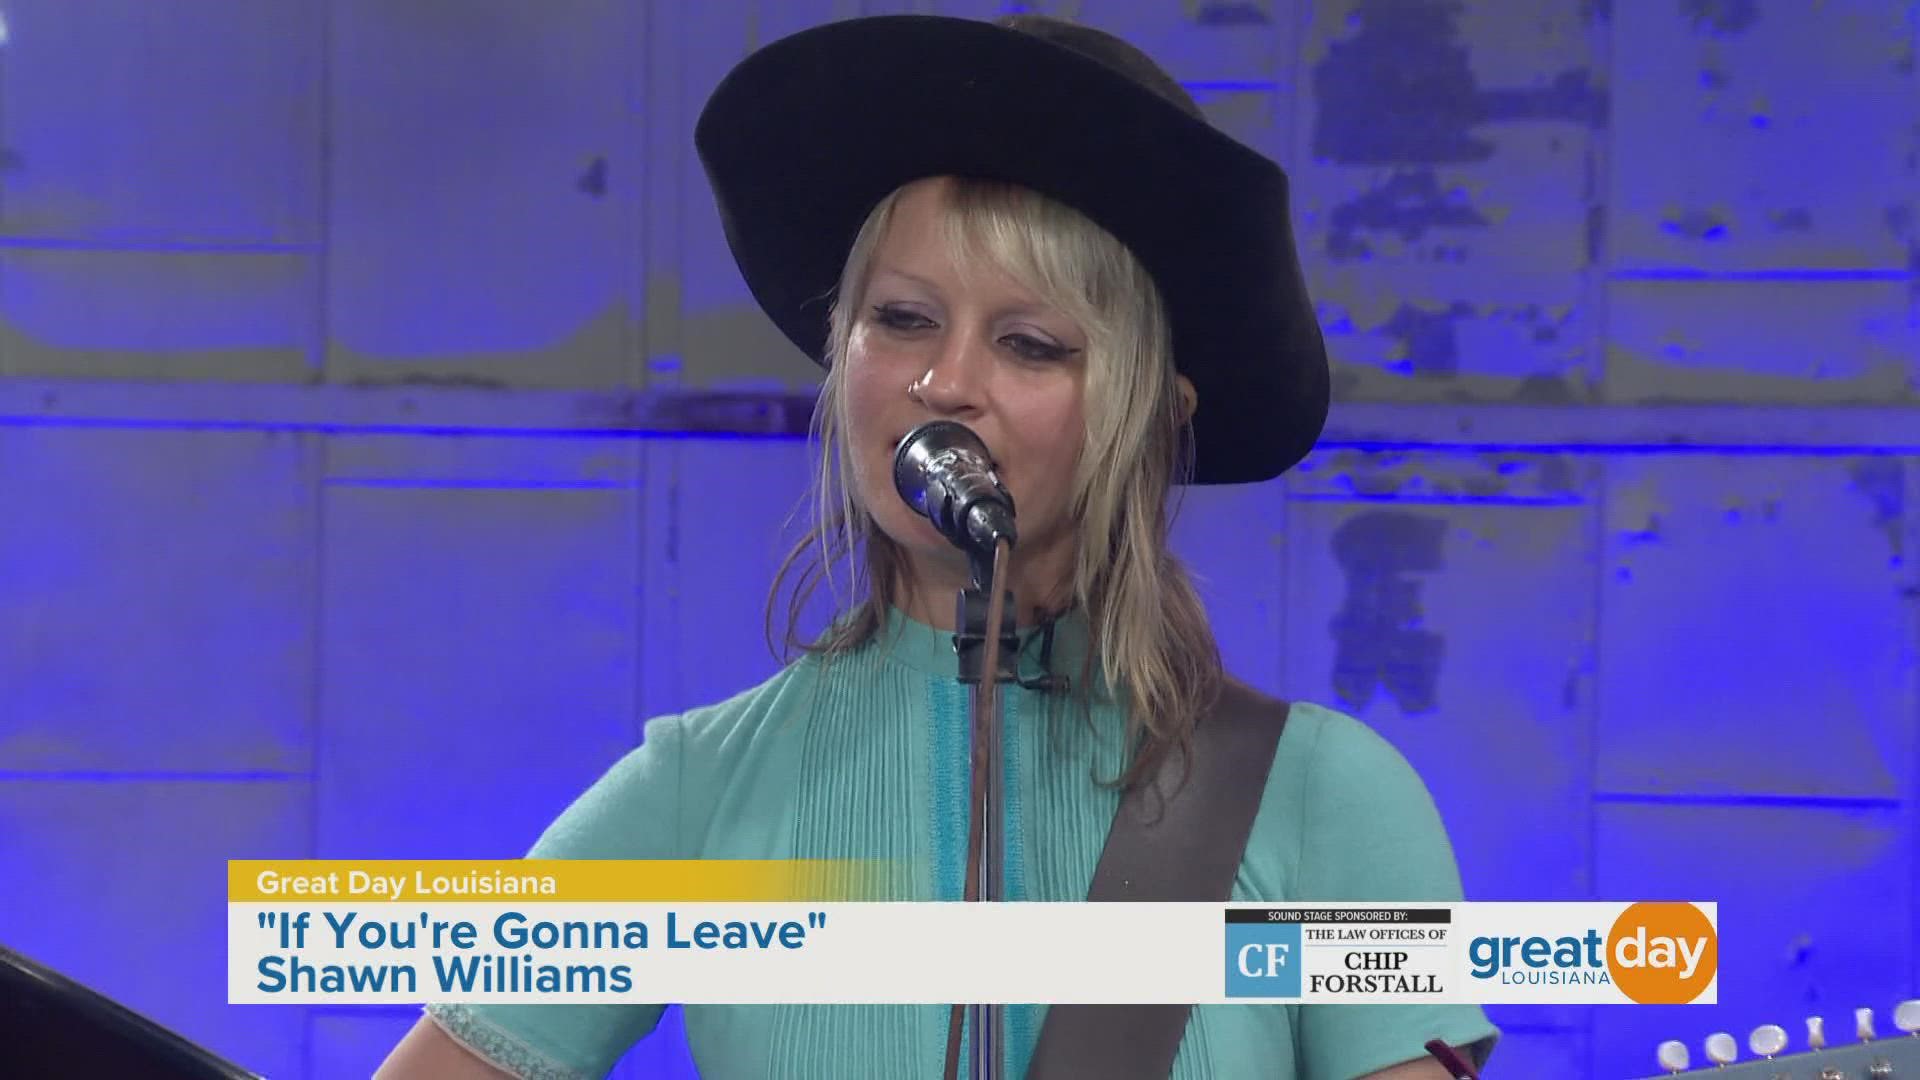 Shawn Williams shares the inspiration behind her song "If You're Gonna Leave."